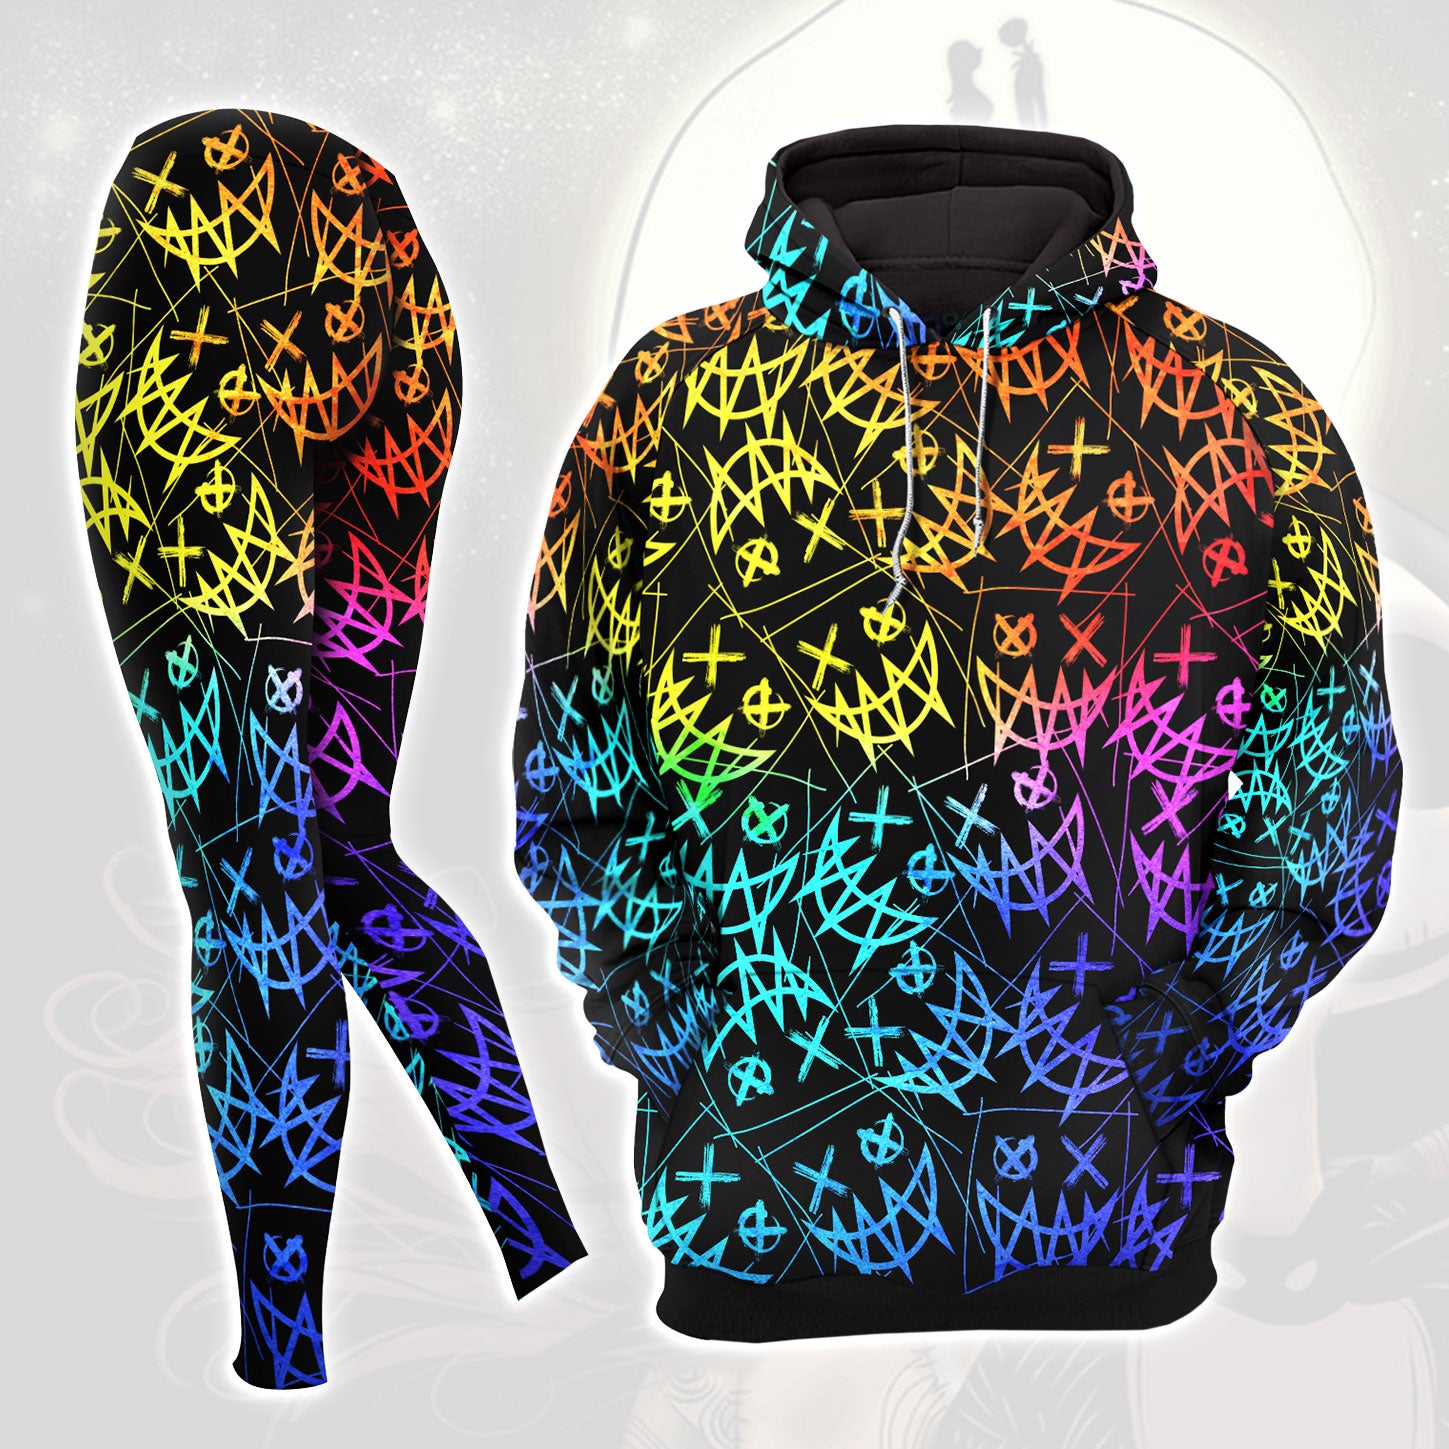 Rainbow Emo Pattern Combo Hoodie and Leggings - Dark and edgy matching set with skull designs for a unique and stylish look